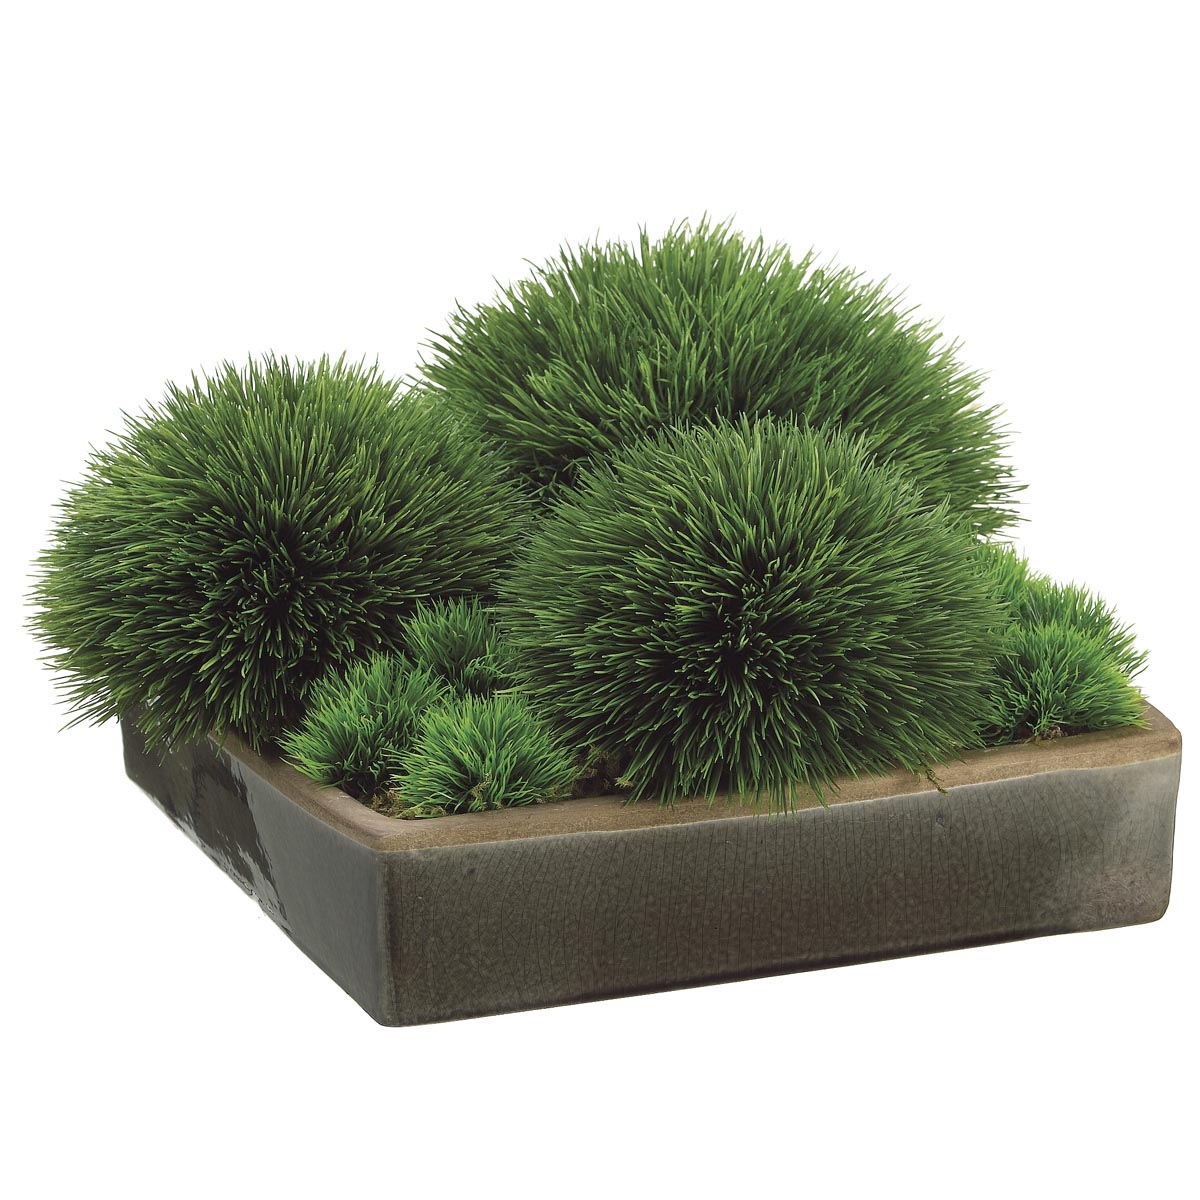 8 Inch Pine Grass In Ceramic Container